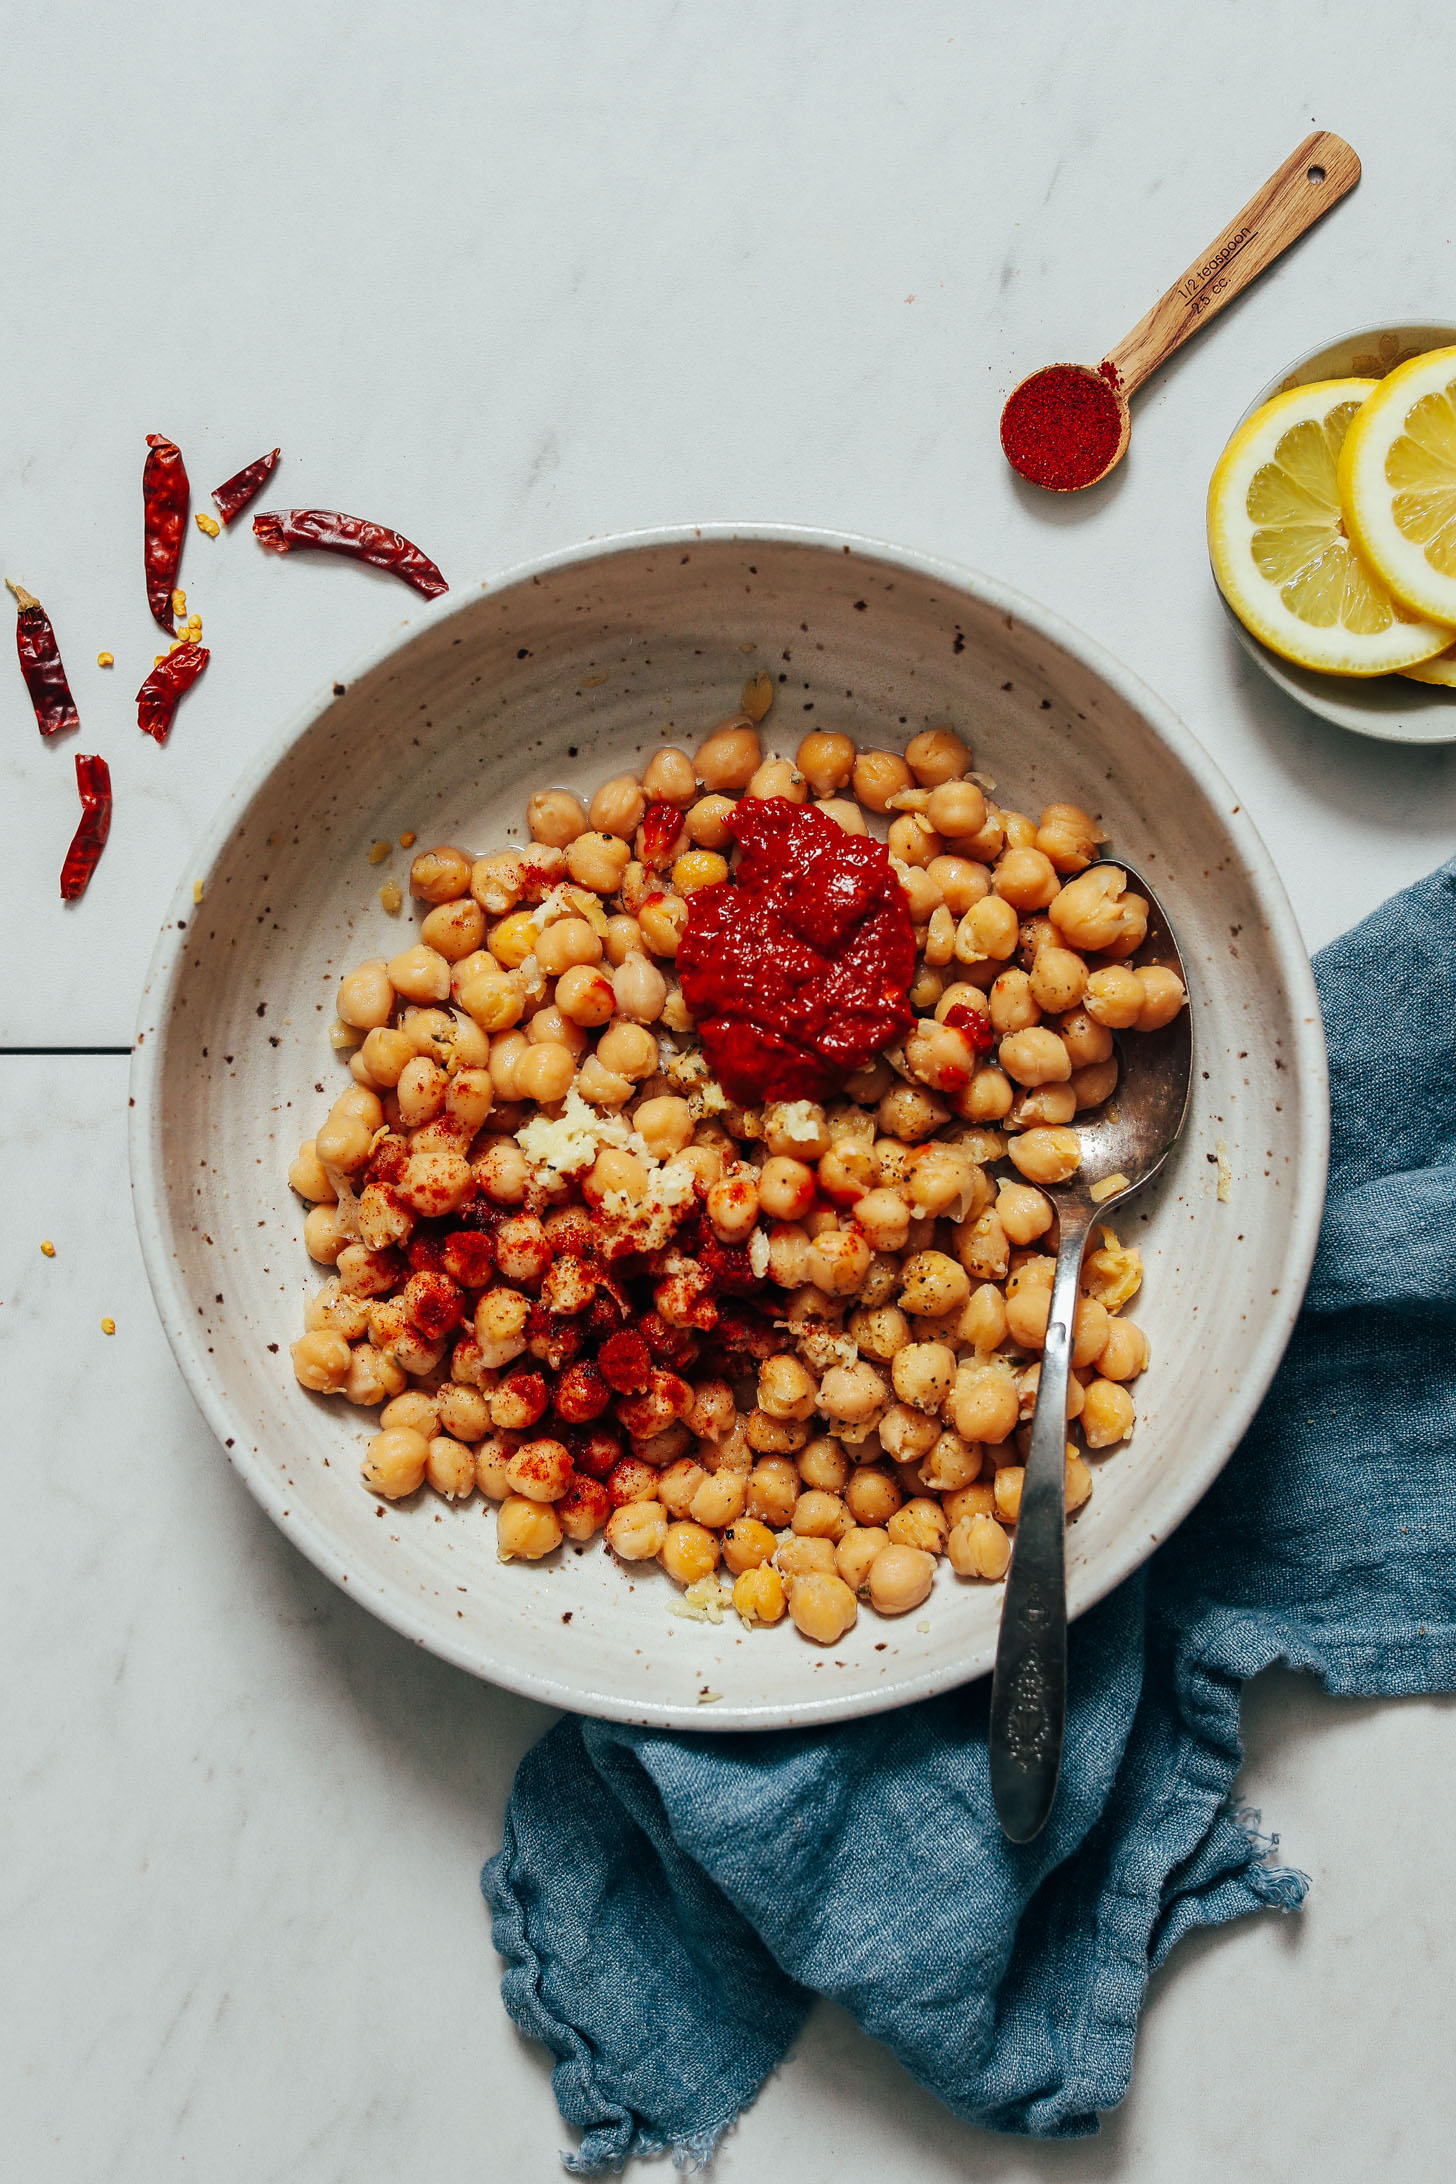 Spoon in a bowl of chickpeas with harissa, garlic, and smoked paprika